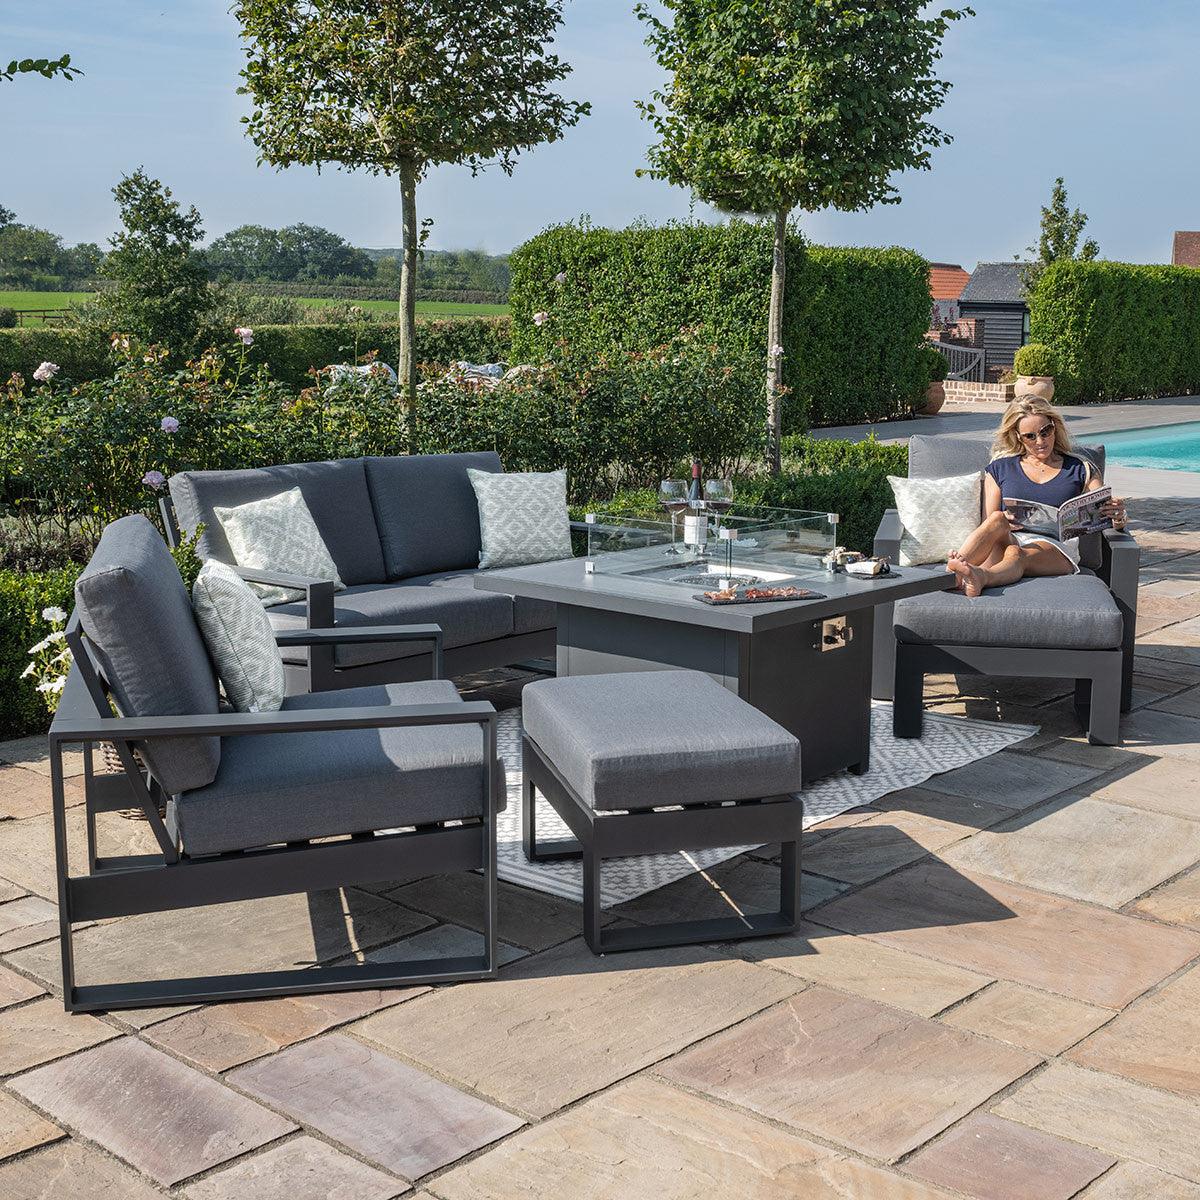 Amalfi 2 Seat Sofa Set With Square Fire Pit Table - Vookoo Lifestyle